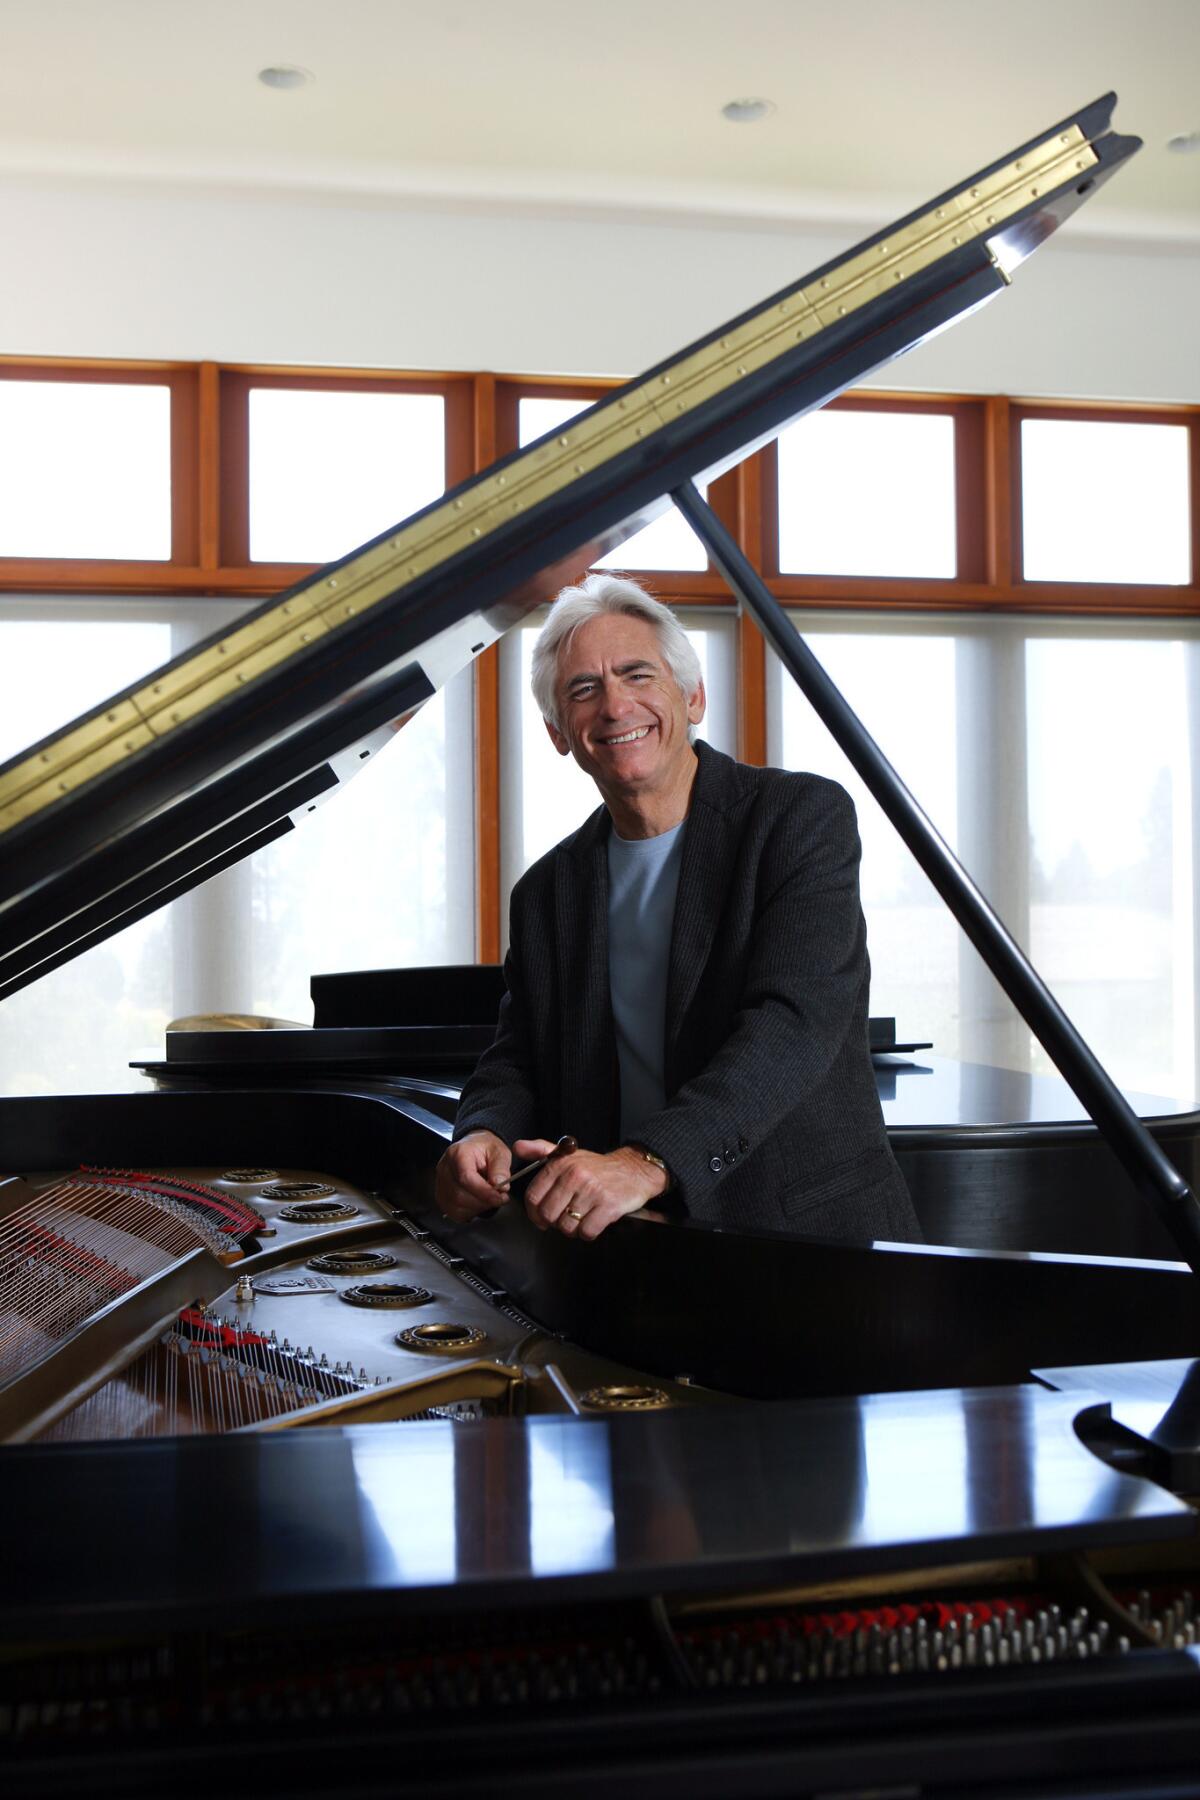 Jazz musician and composer David Benoit is photographed at his Palos Verdes Estates home on May 14, 2009.